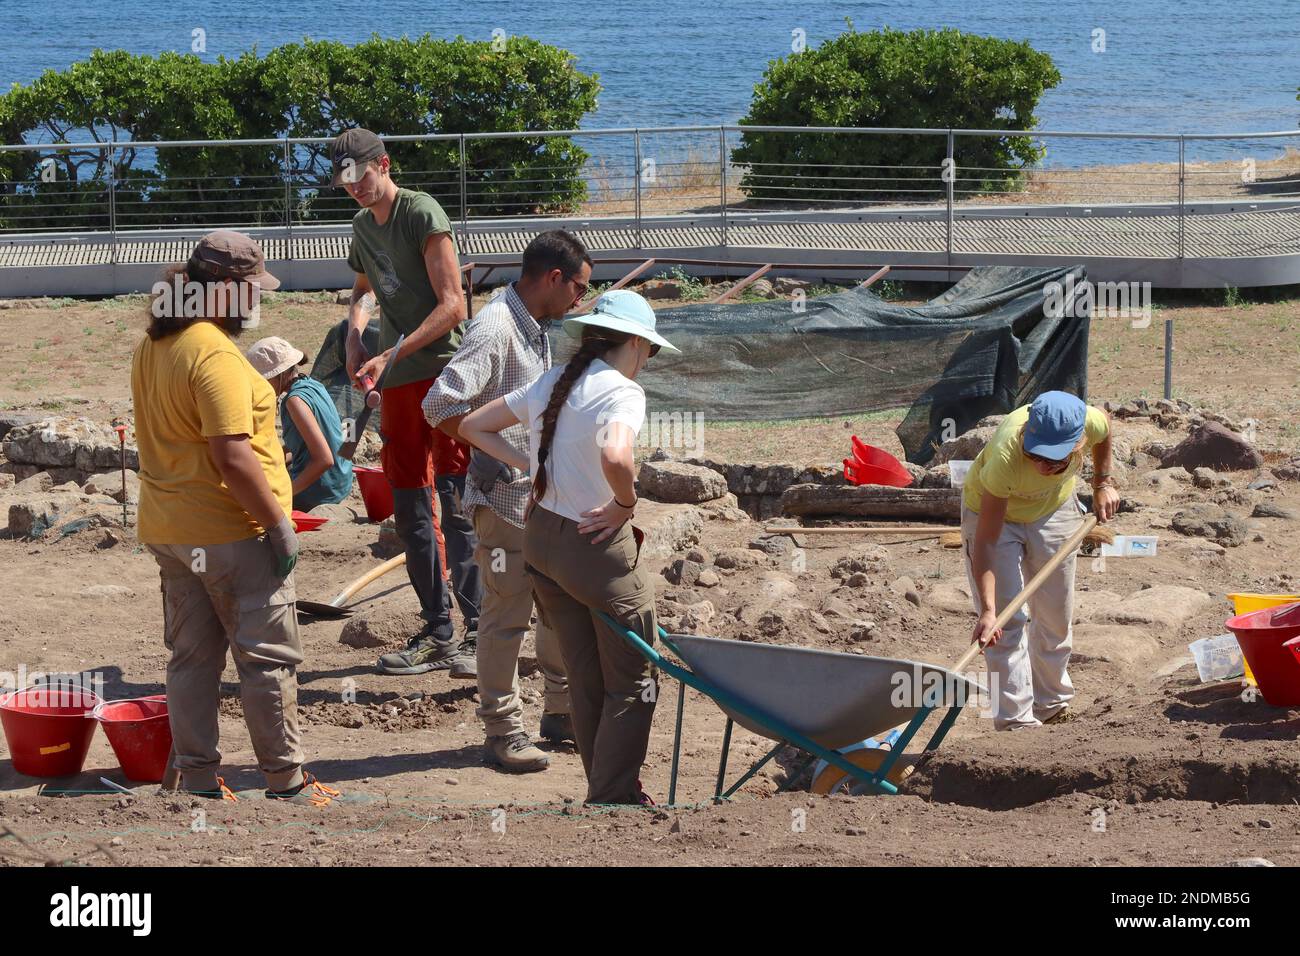 Archaeologists and students from the University of Padova, excavating artifacts at the site of the Ancient City of Nora, Sardinia, September 2022. Stock Photo